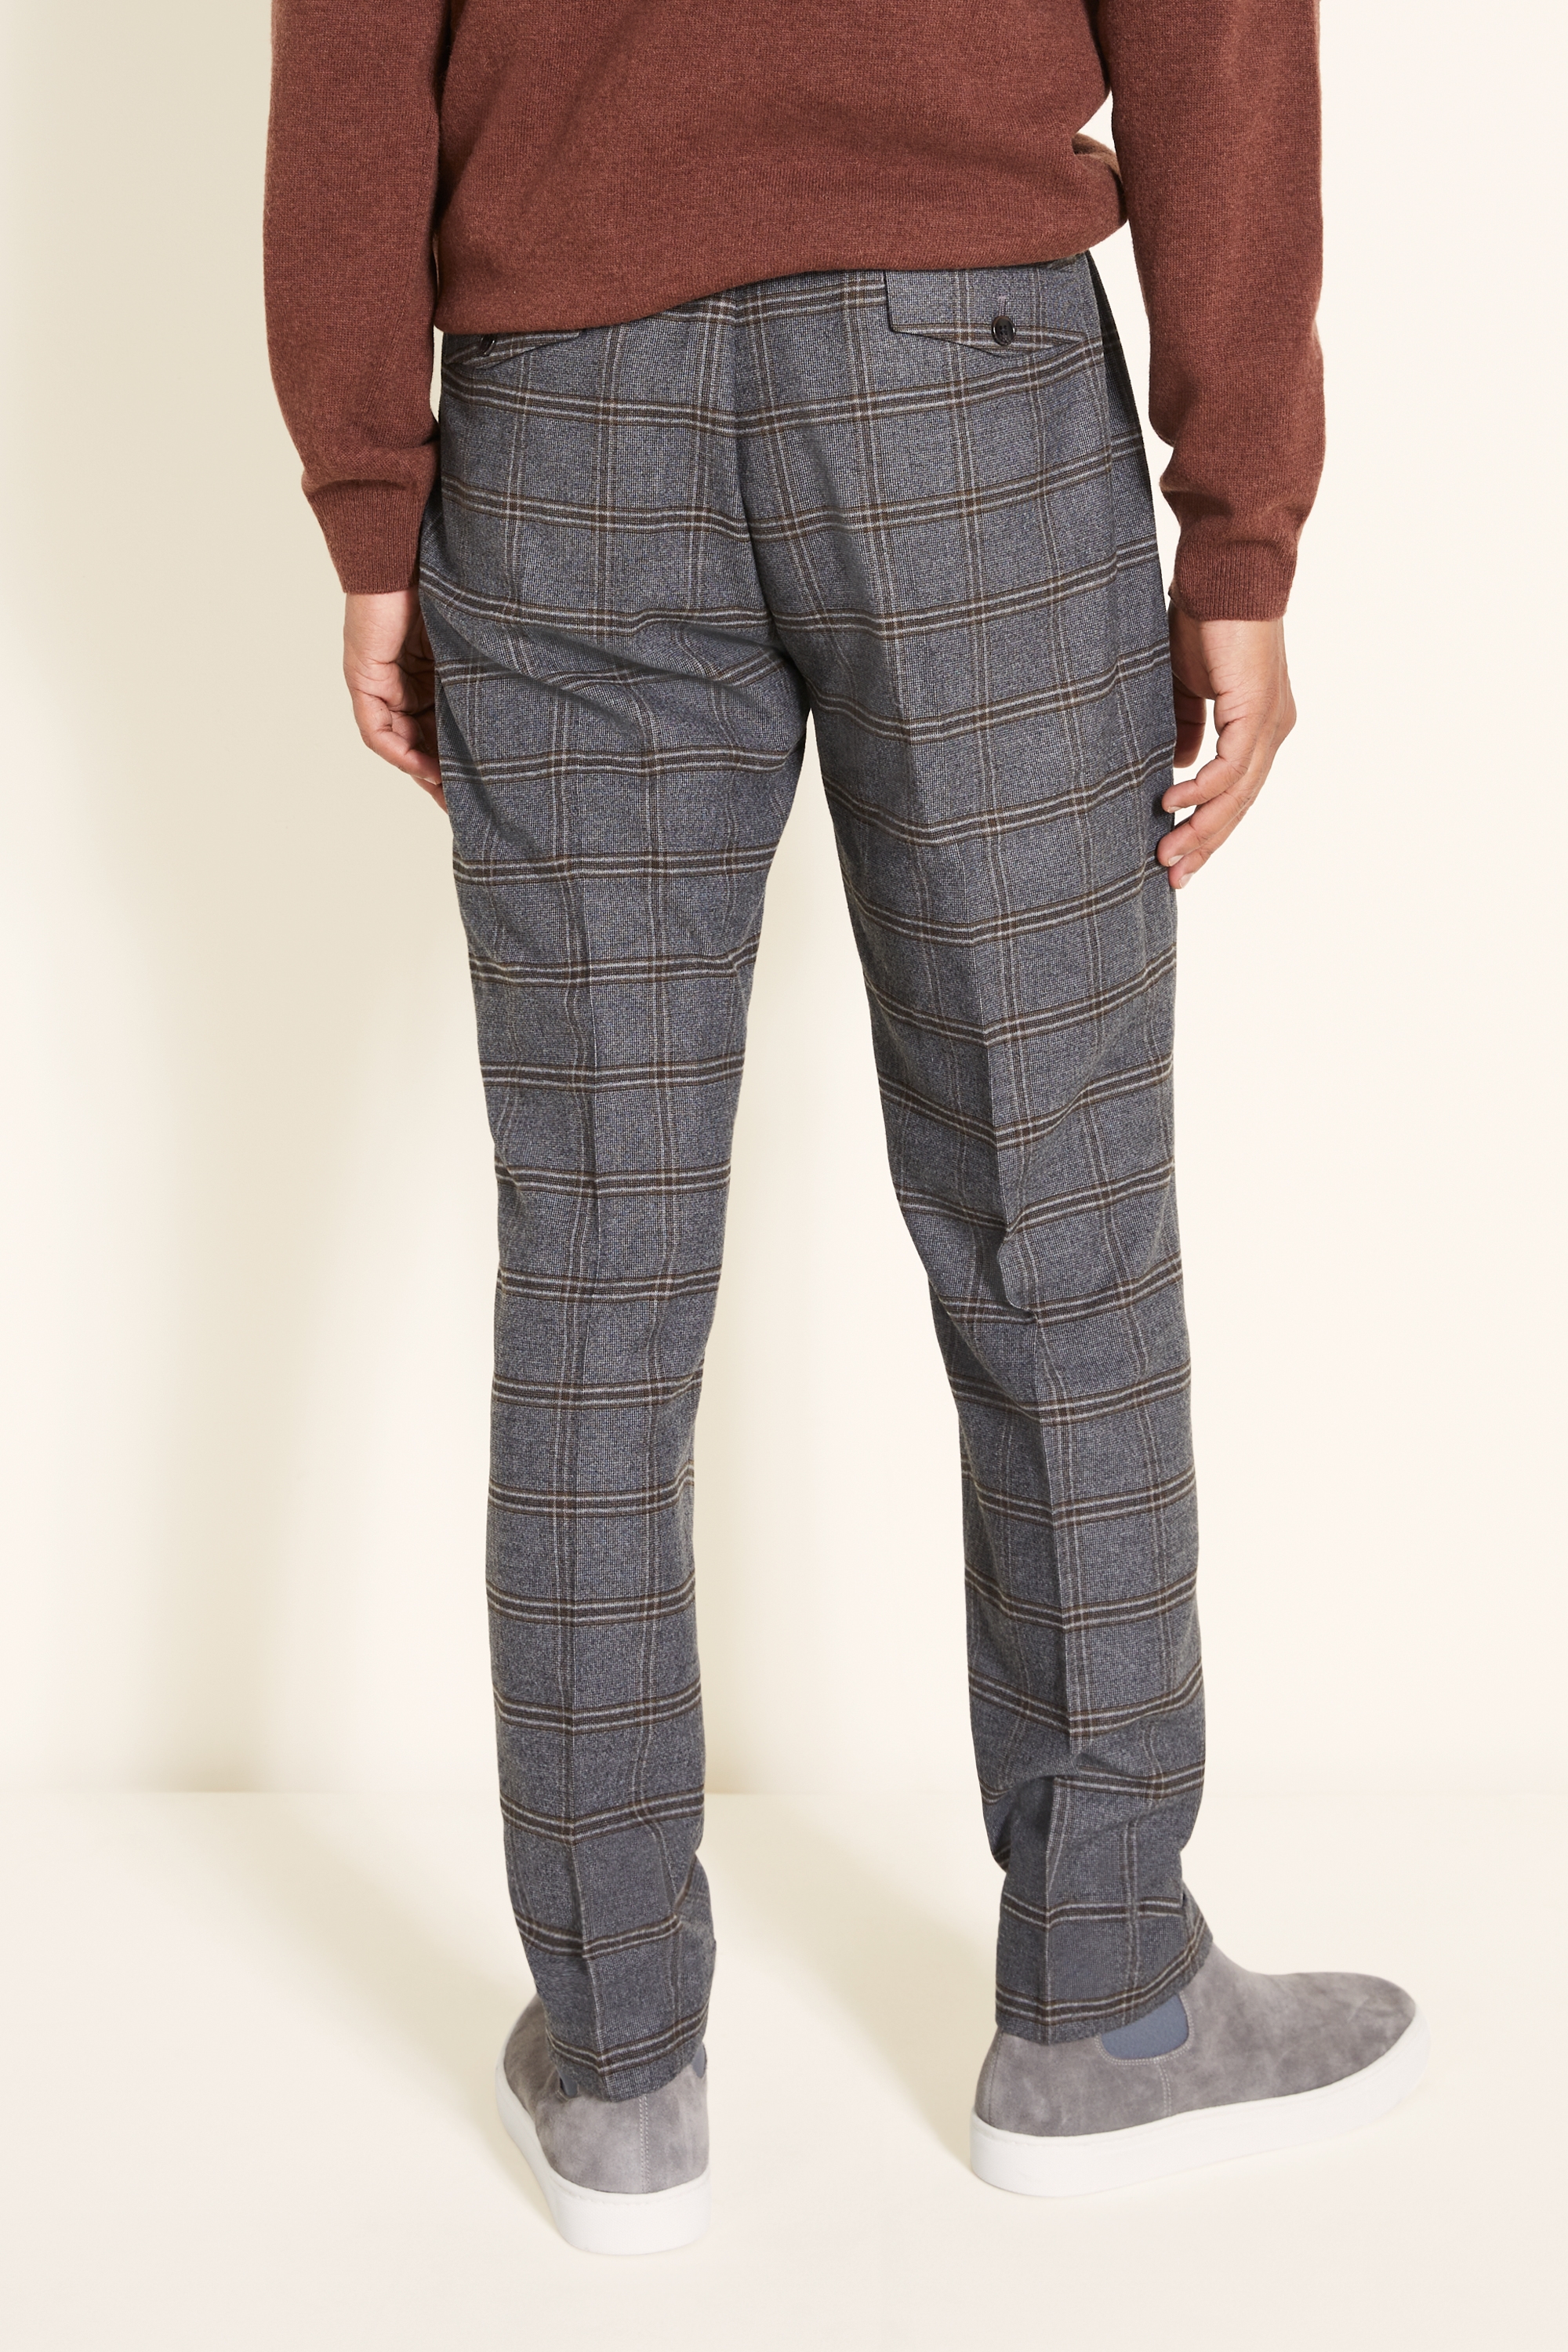 Tailored Fit Charcoal Check Trousers | Buy Online at Moss